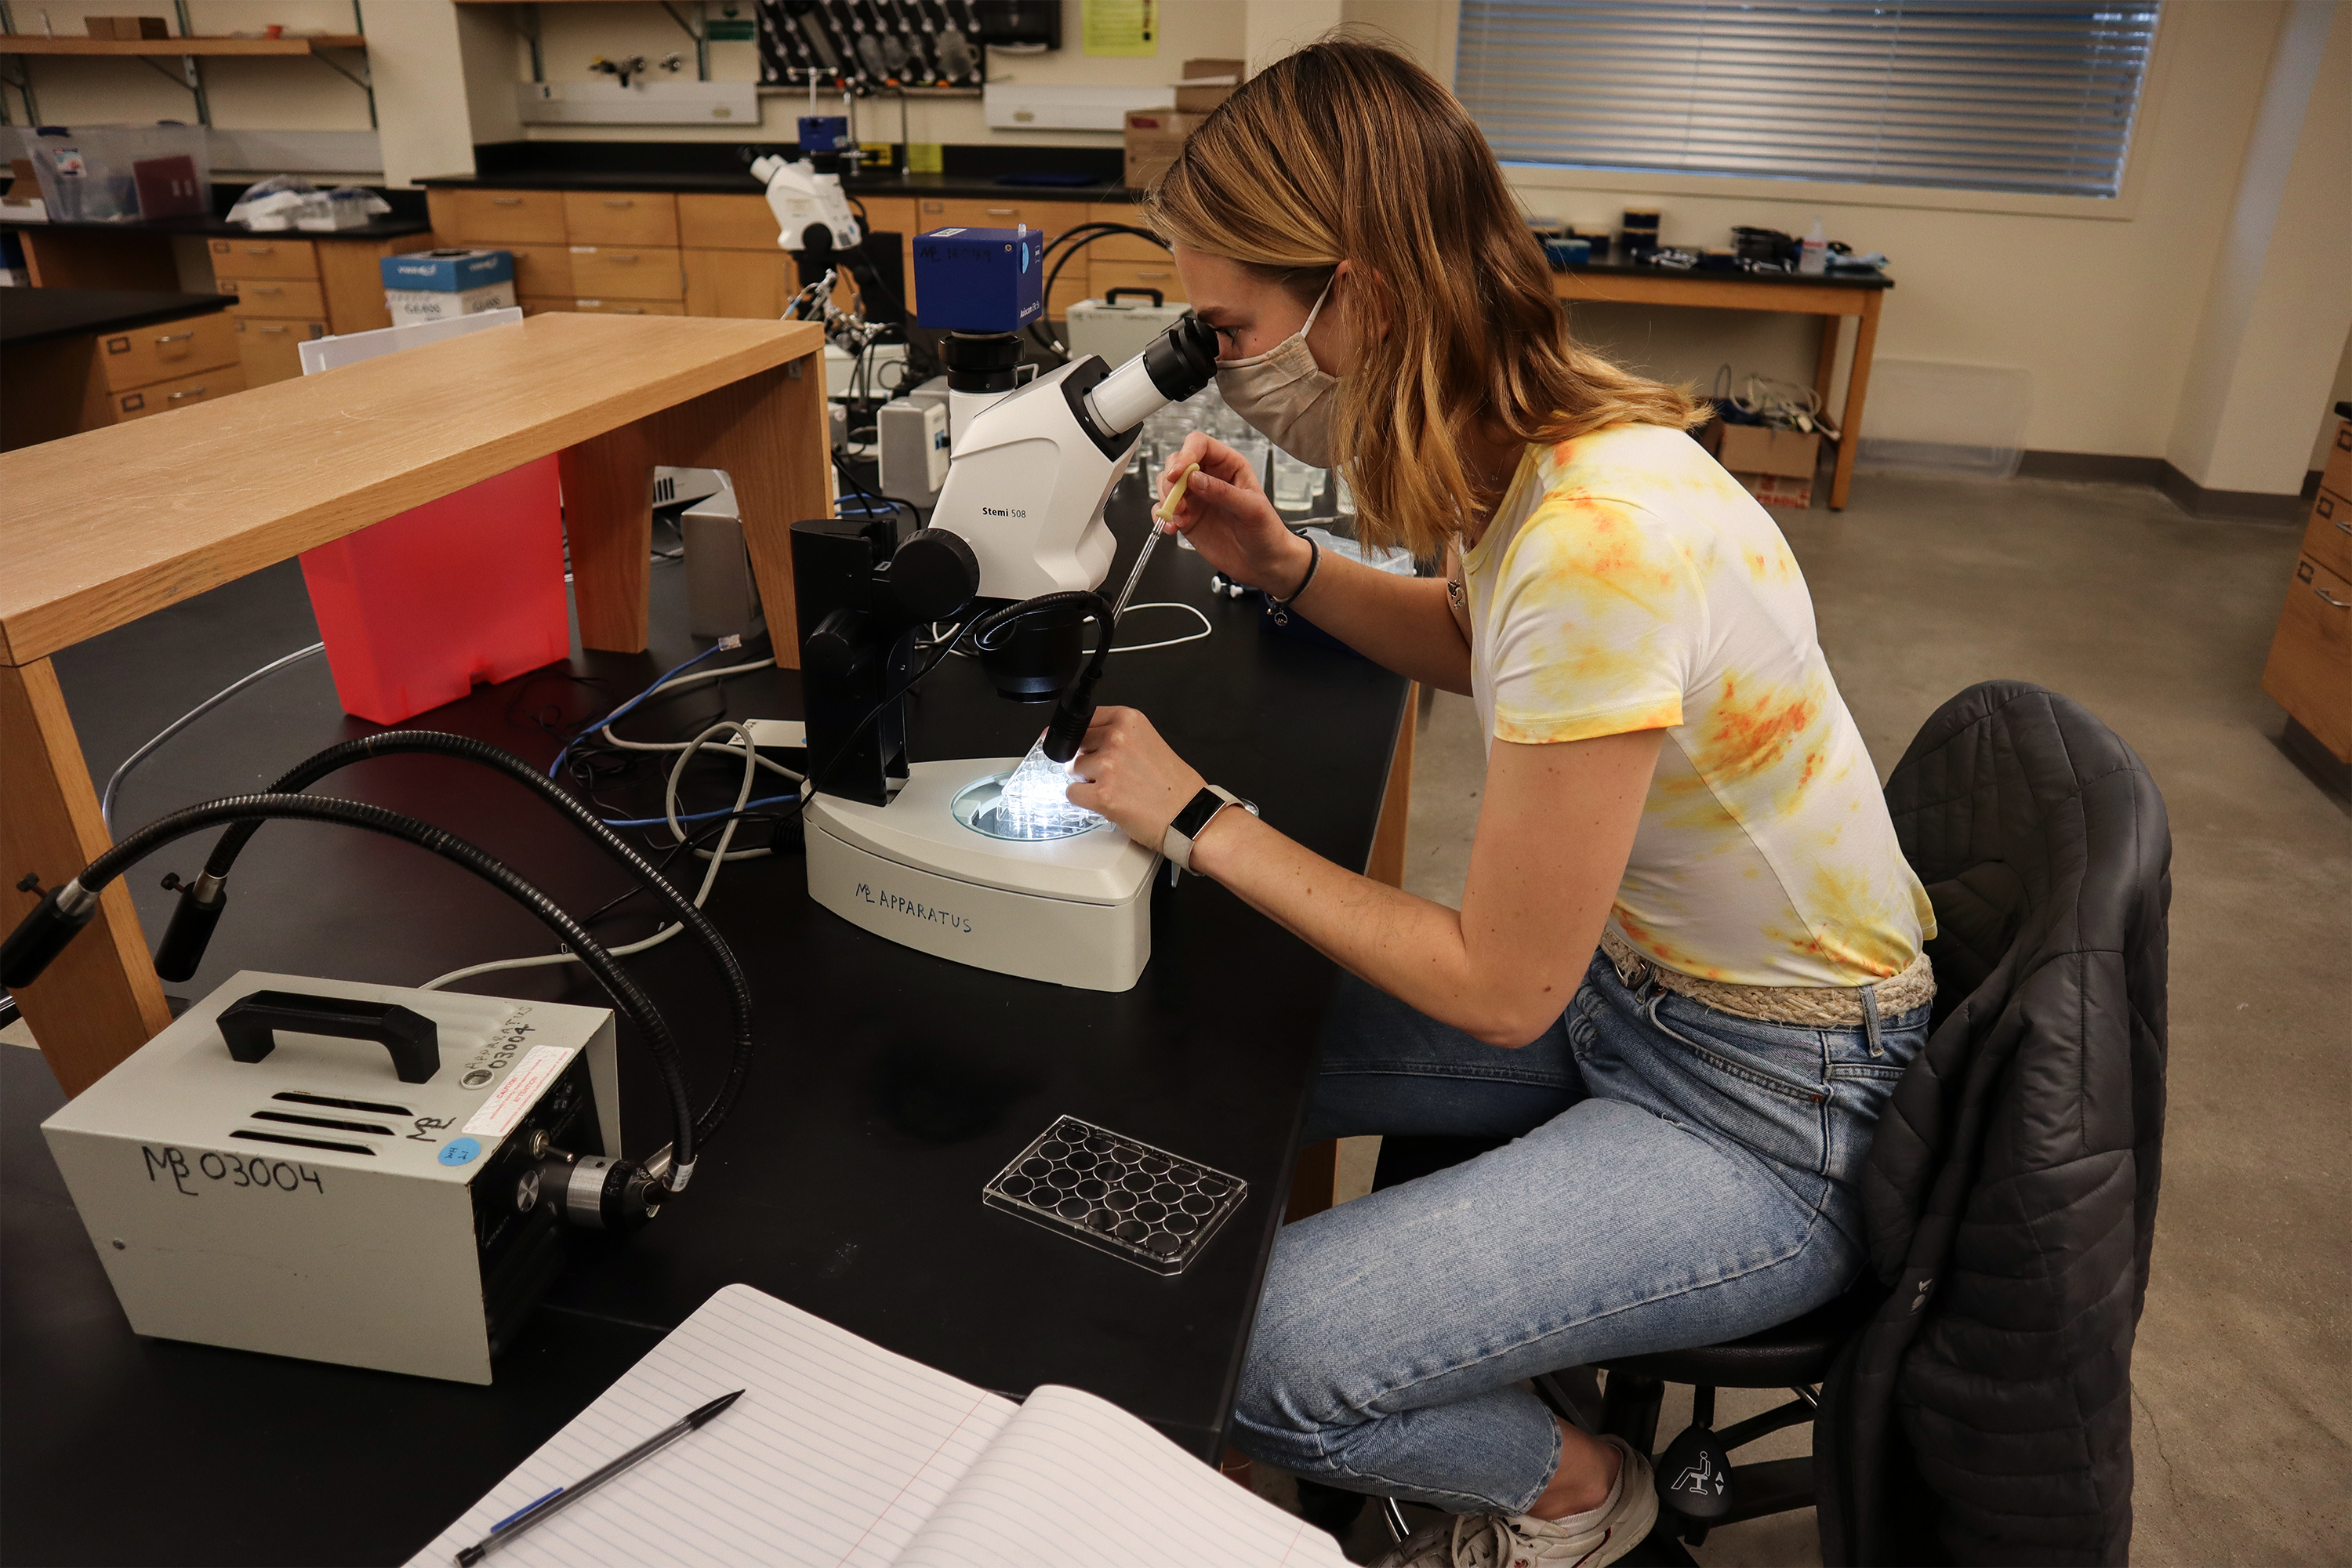 Phoebe Hall, third year biology student, examines specimens through a microscope during the Stem Cells and Regeneration course at the MBL. Credit: Emily Greenhalgh 